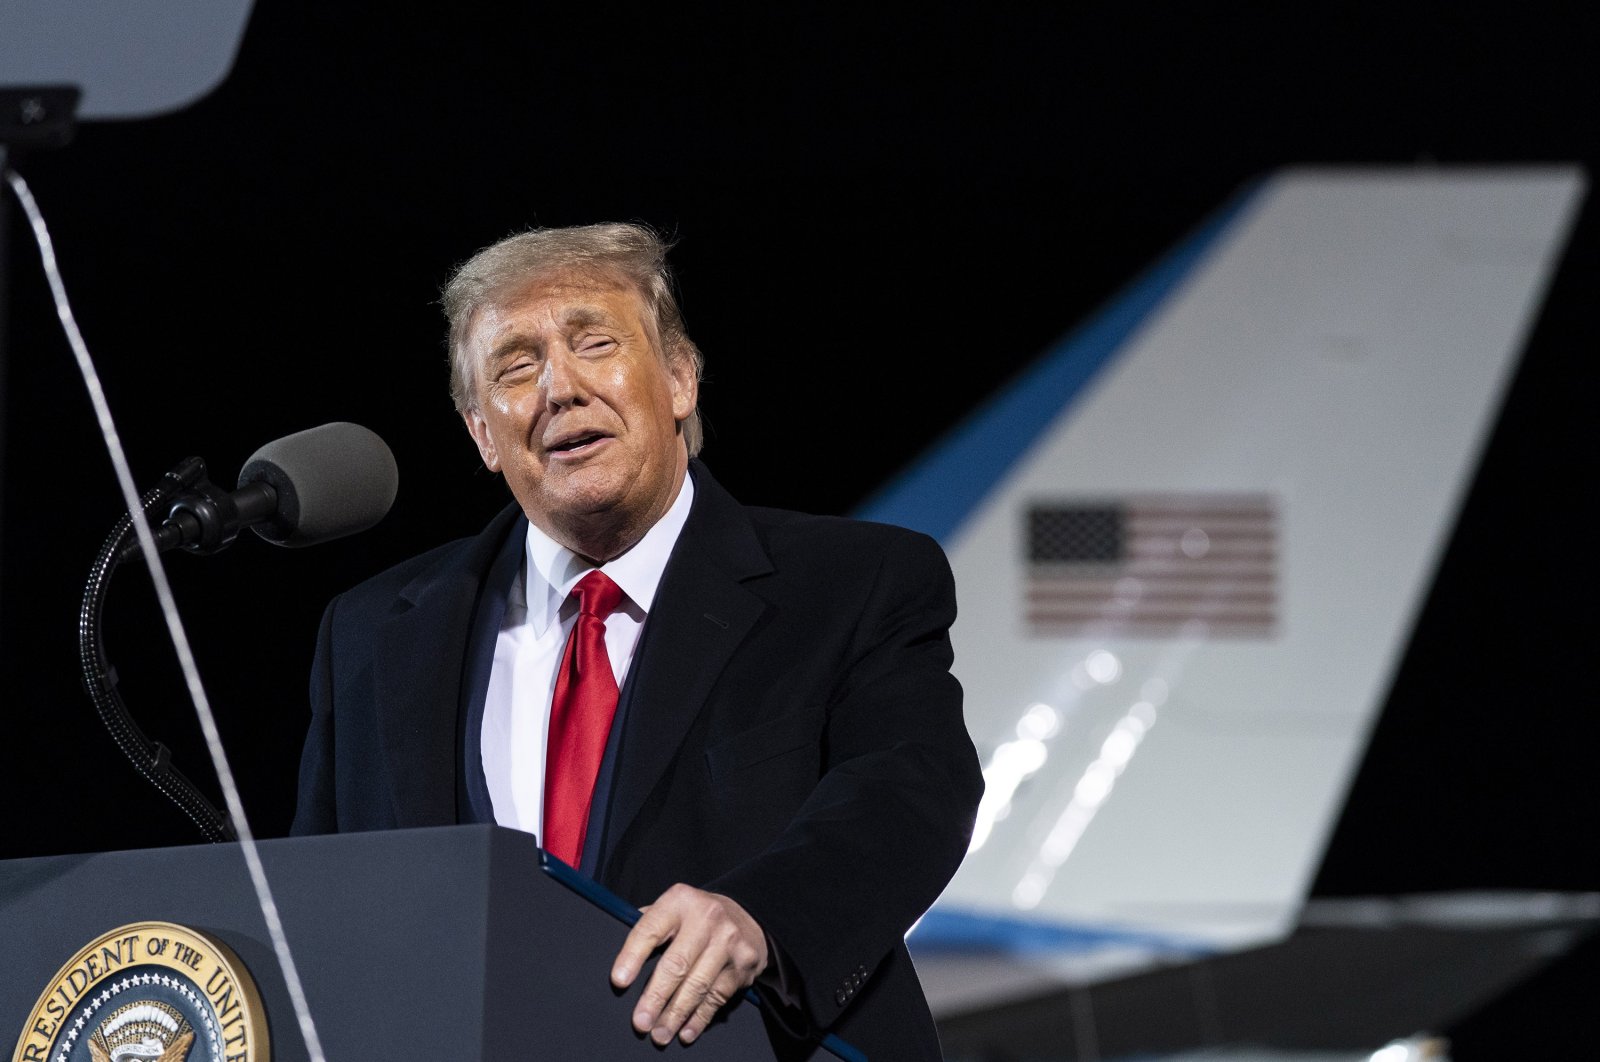 President Donald Trump speaks at a campaign rally at Duluth International Airport, Wednesday, Sept. 30, 2020, in Duluth, Minn. (AP Photo)